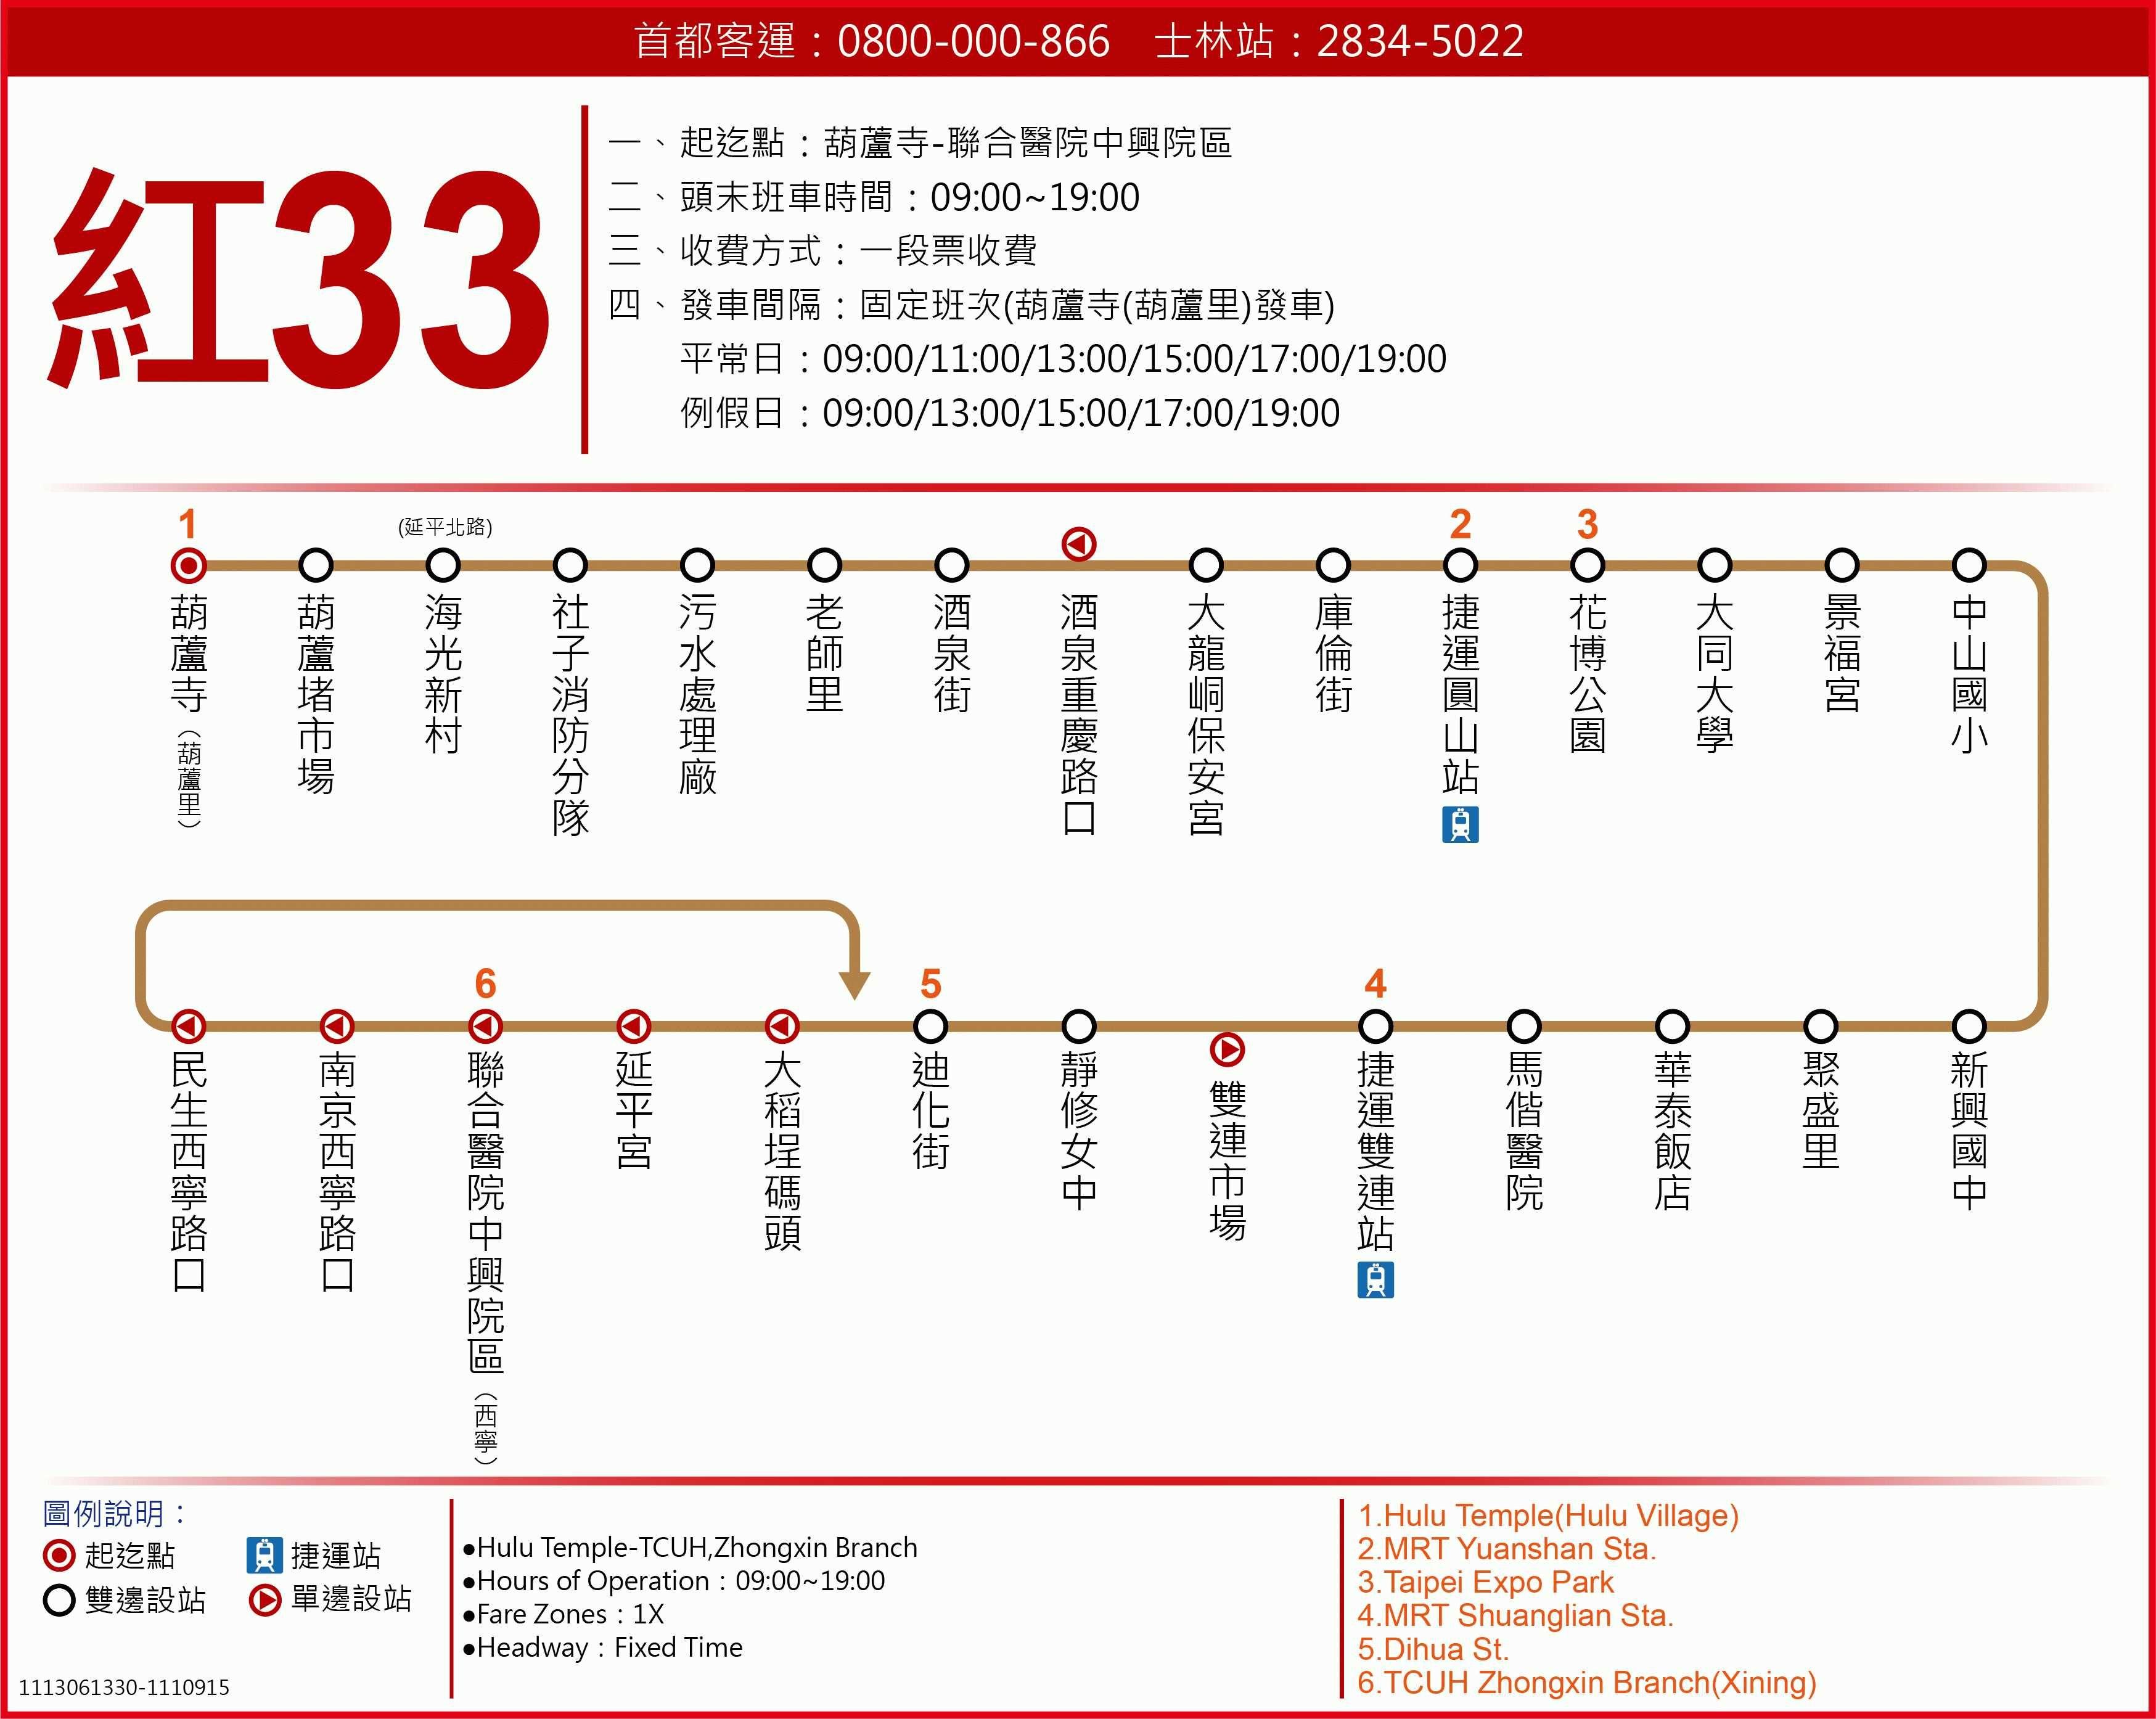 R33Route Map-台北市 Bus